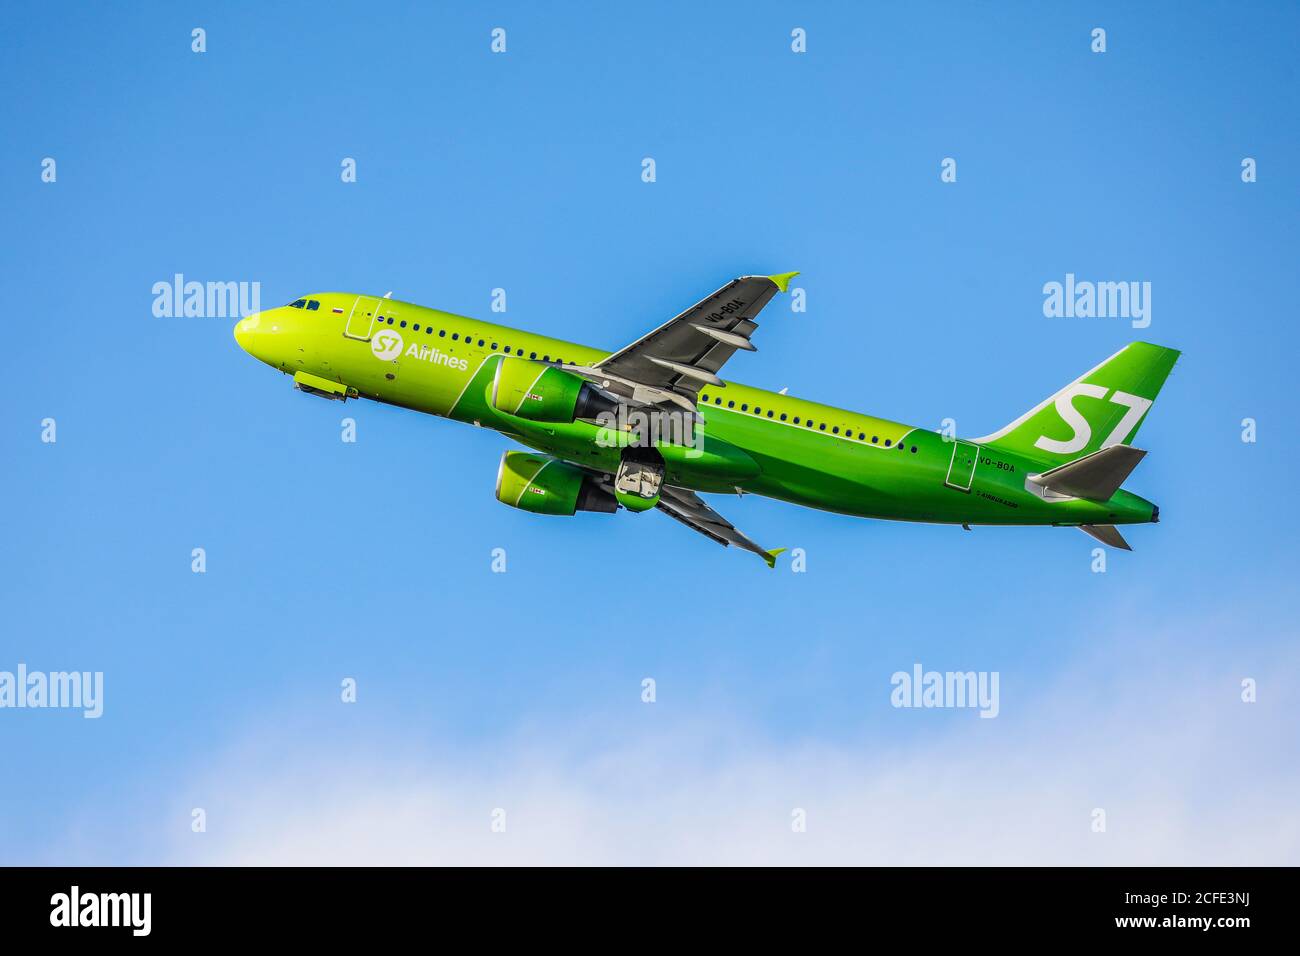 Russian S7 Airlines, Airbus A320 aircraft takes off at Düsseldorf International Airport, VQ-BOA S7 SIBERIA AIRLINES AIRBUS A320-200, Düsseldorf, Stock Photo